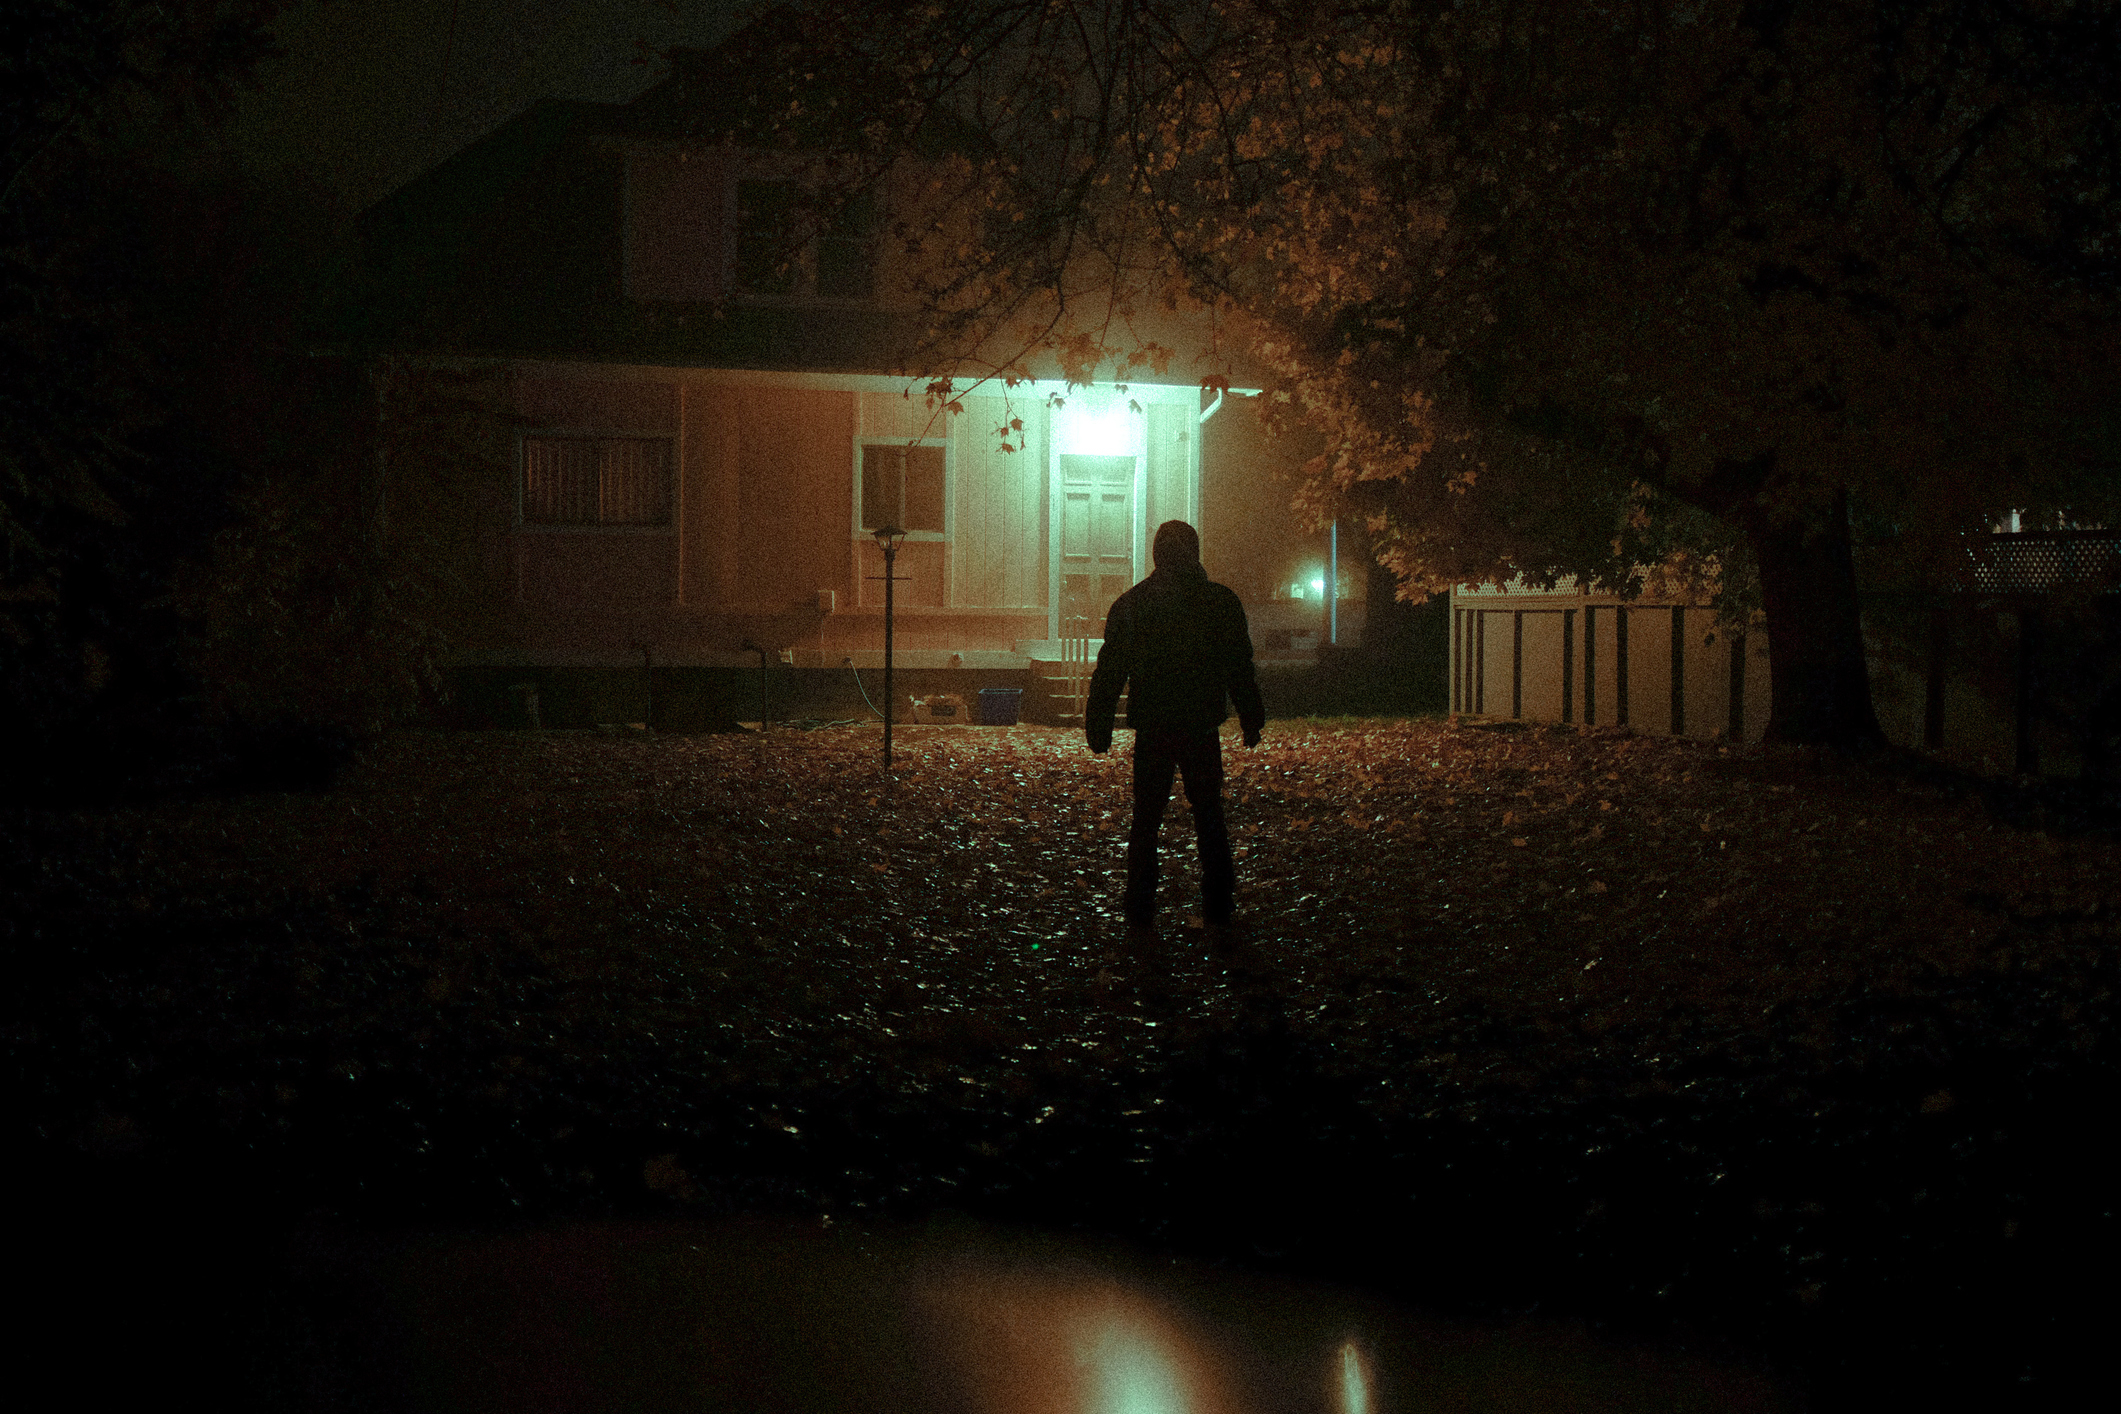 Person standing in front of a house at night, illuminated by a single light source